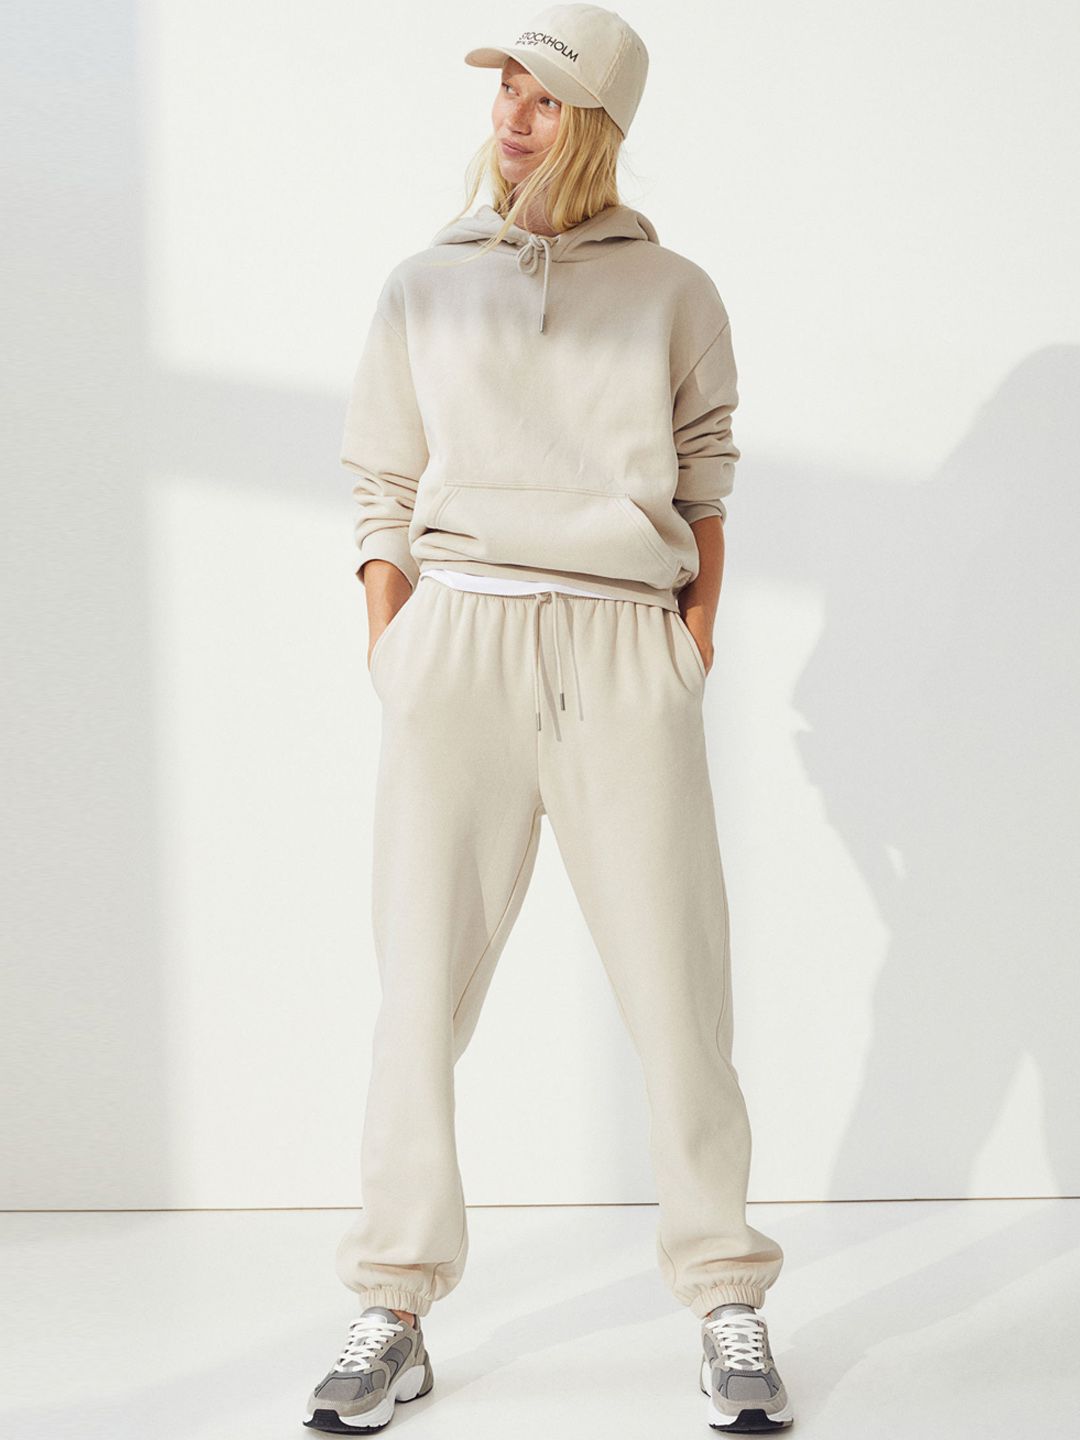 H&M Women Cotton-Blend Sweatpants Price in India